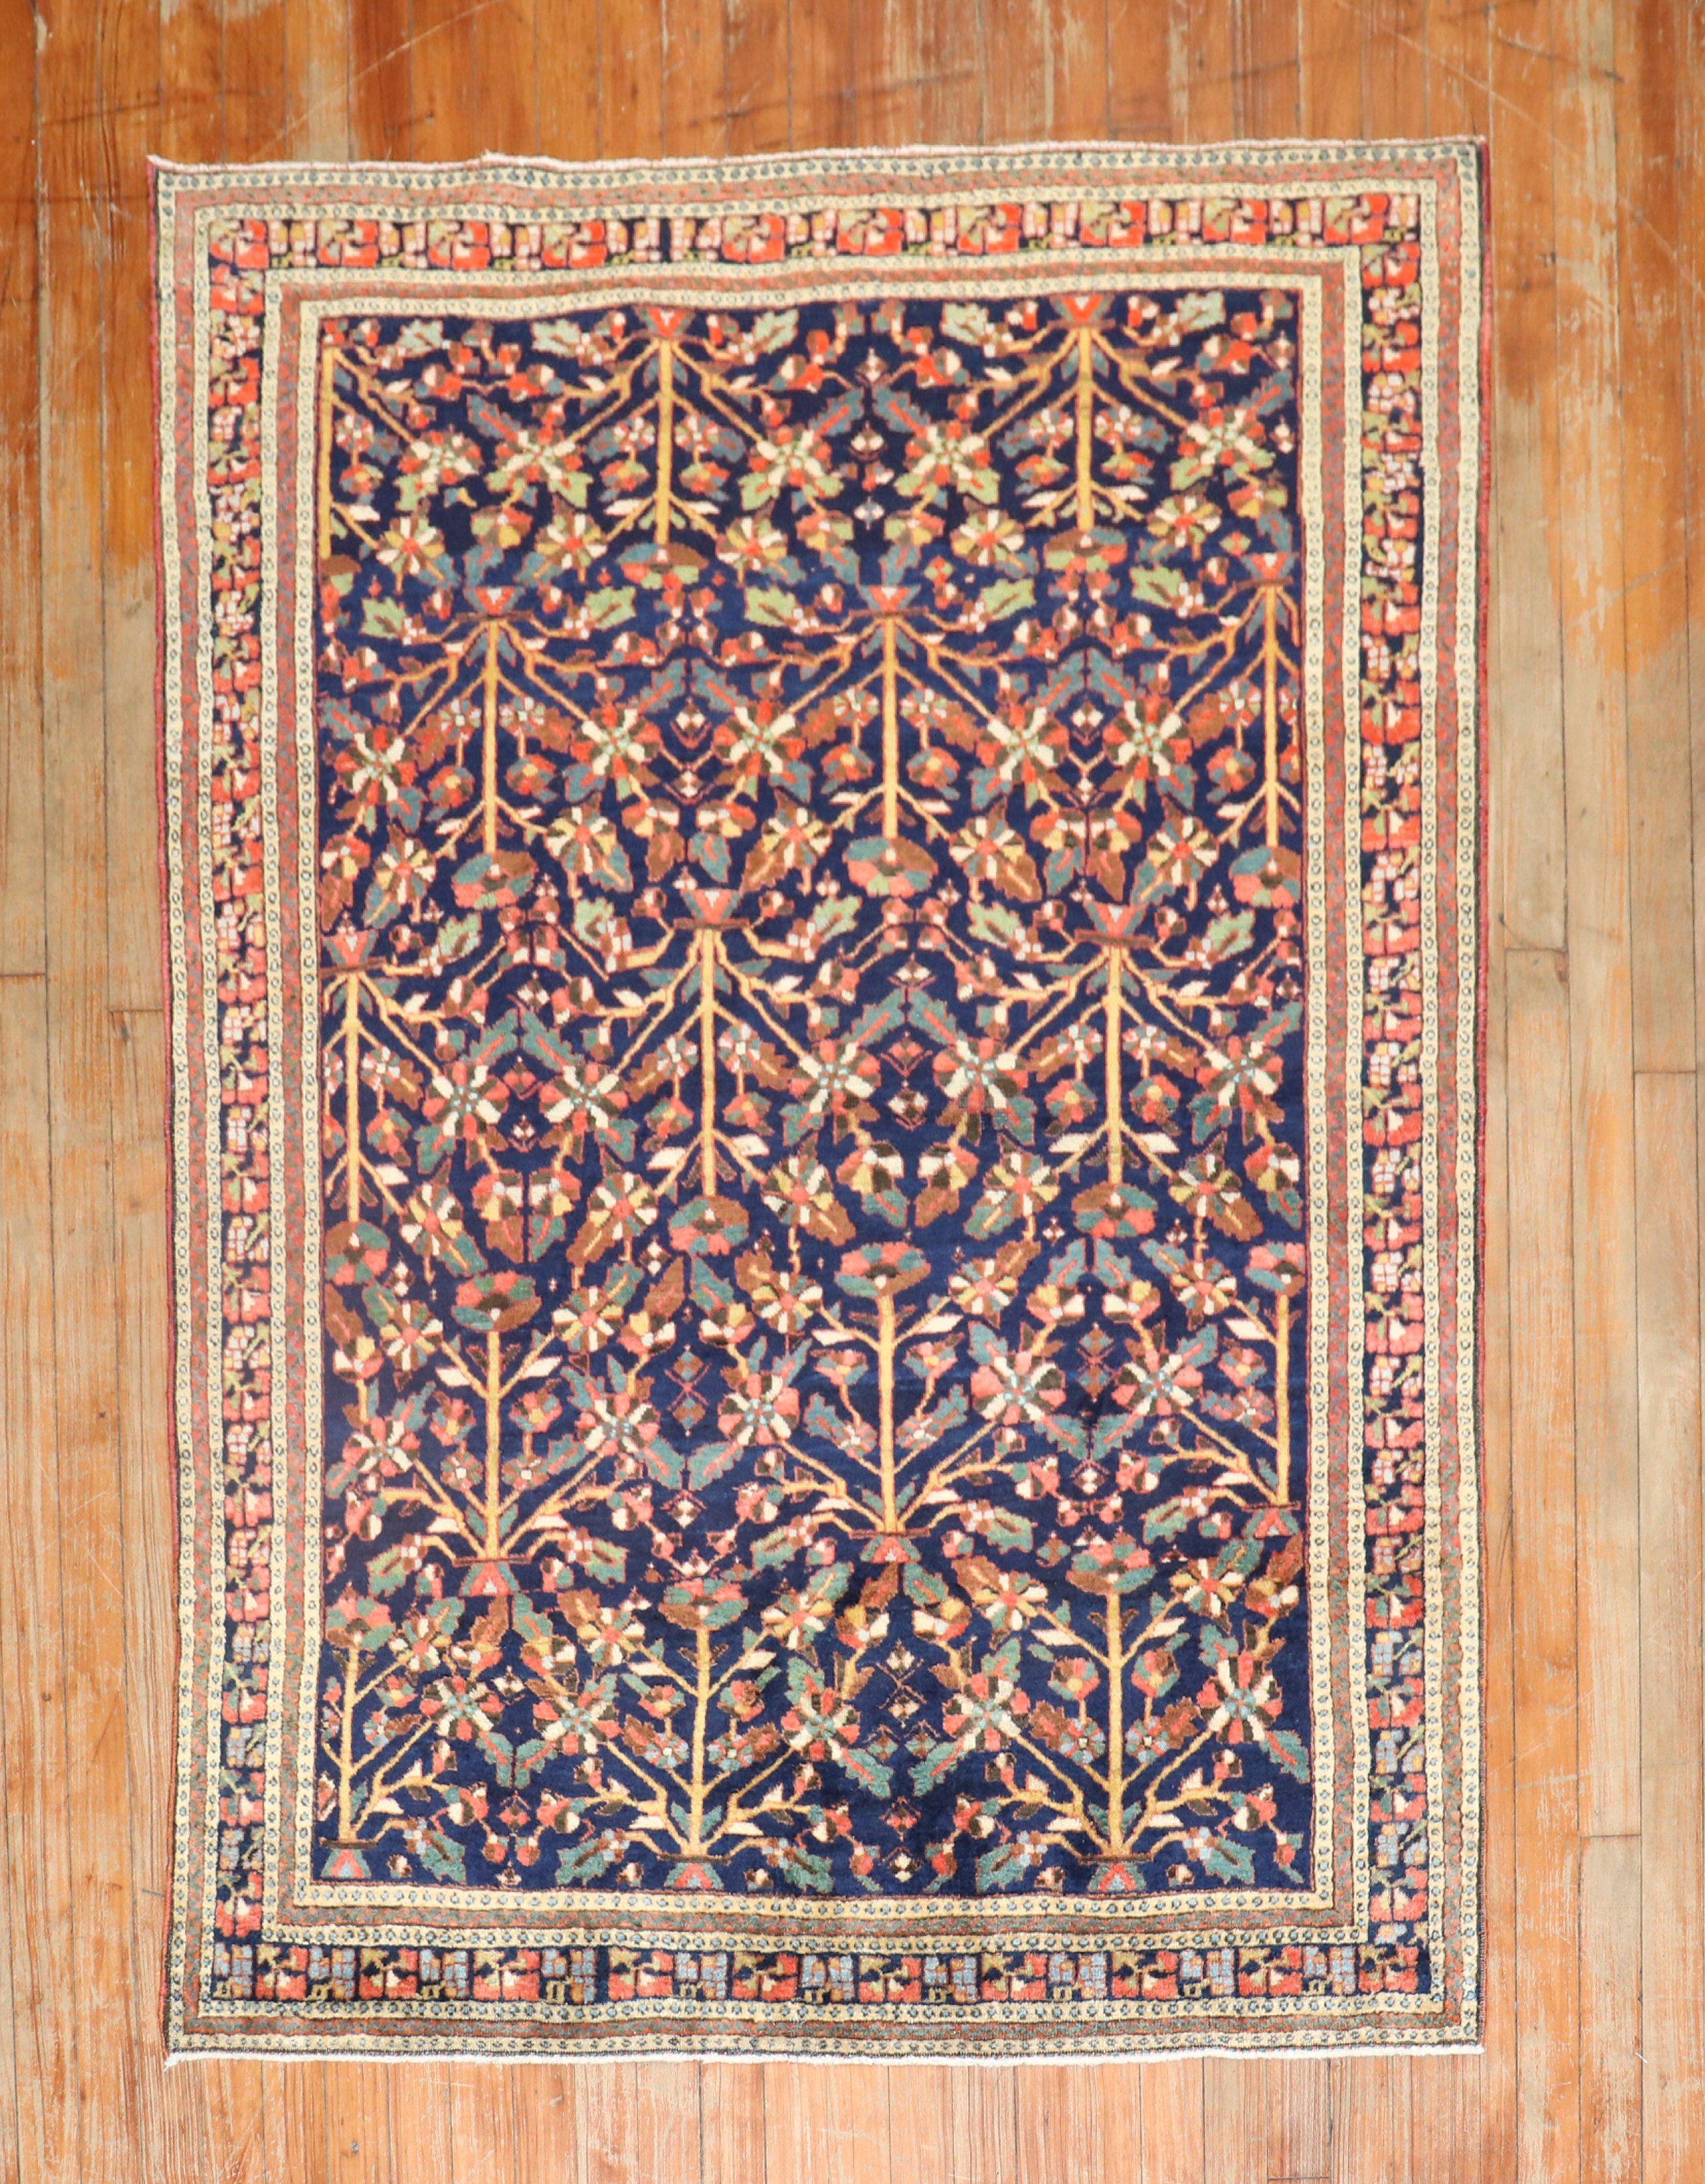 An early 20th Century Persian Farahan rug with an all-over floral design.

Measures: 4' x 5'5''.